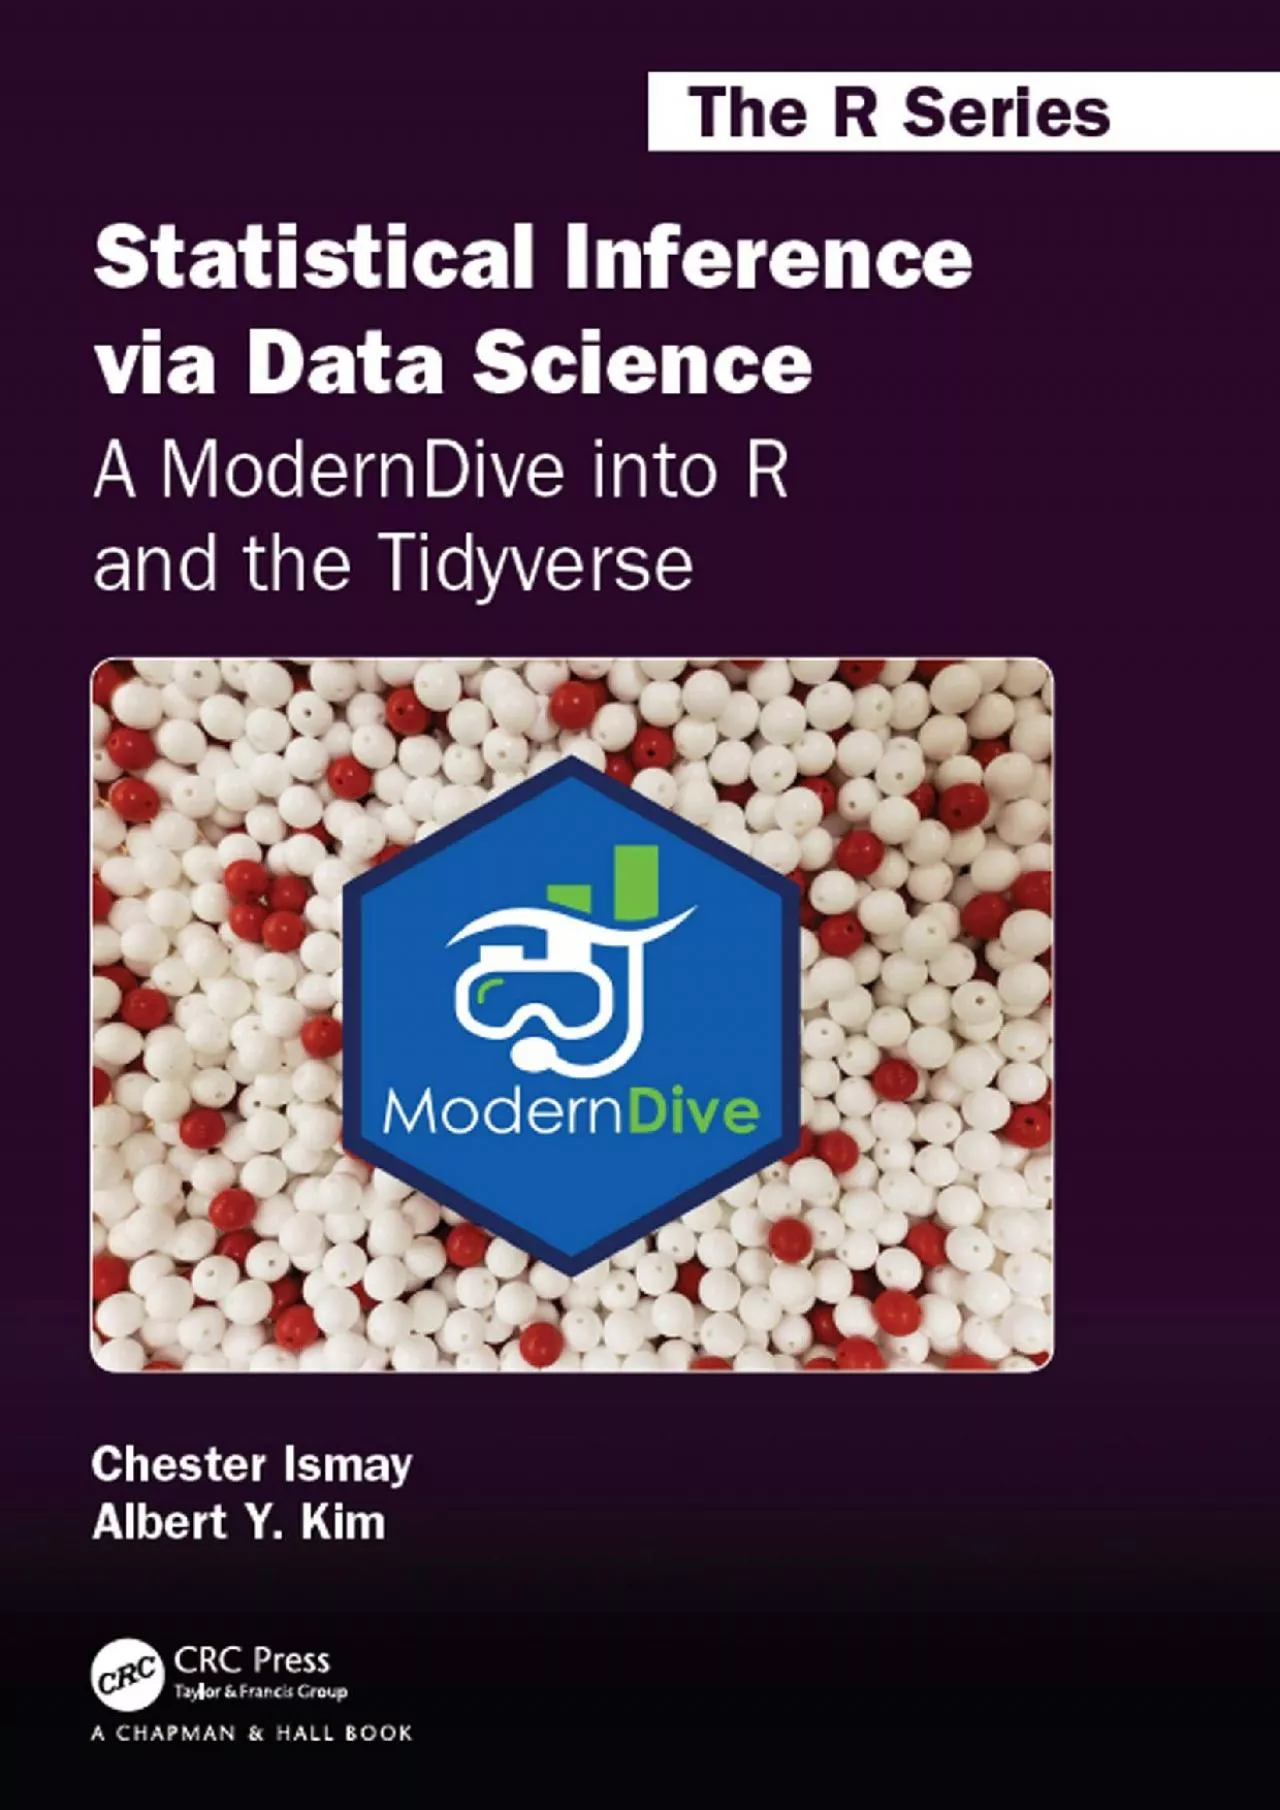 [READING BOOK]-Statistical Inference via Data Science: A ModernDive into R and the Tidyverse: